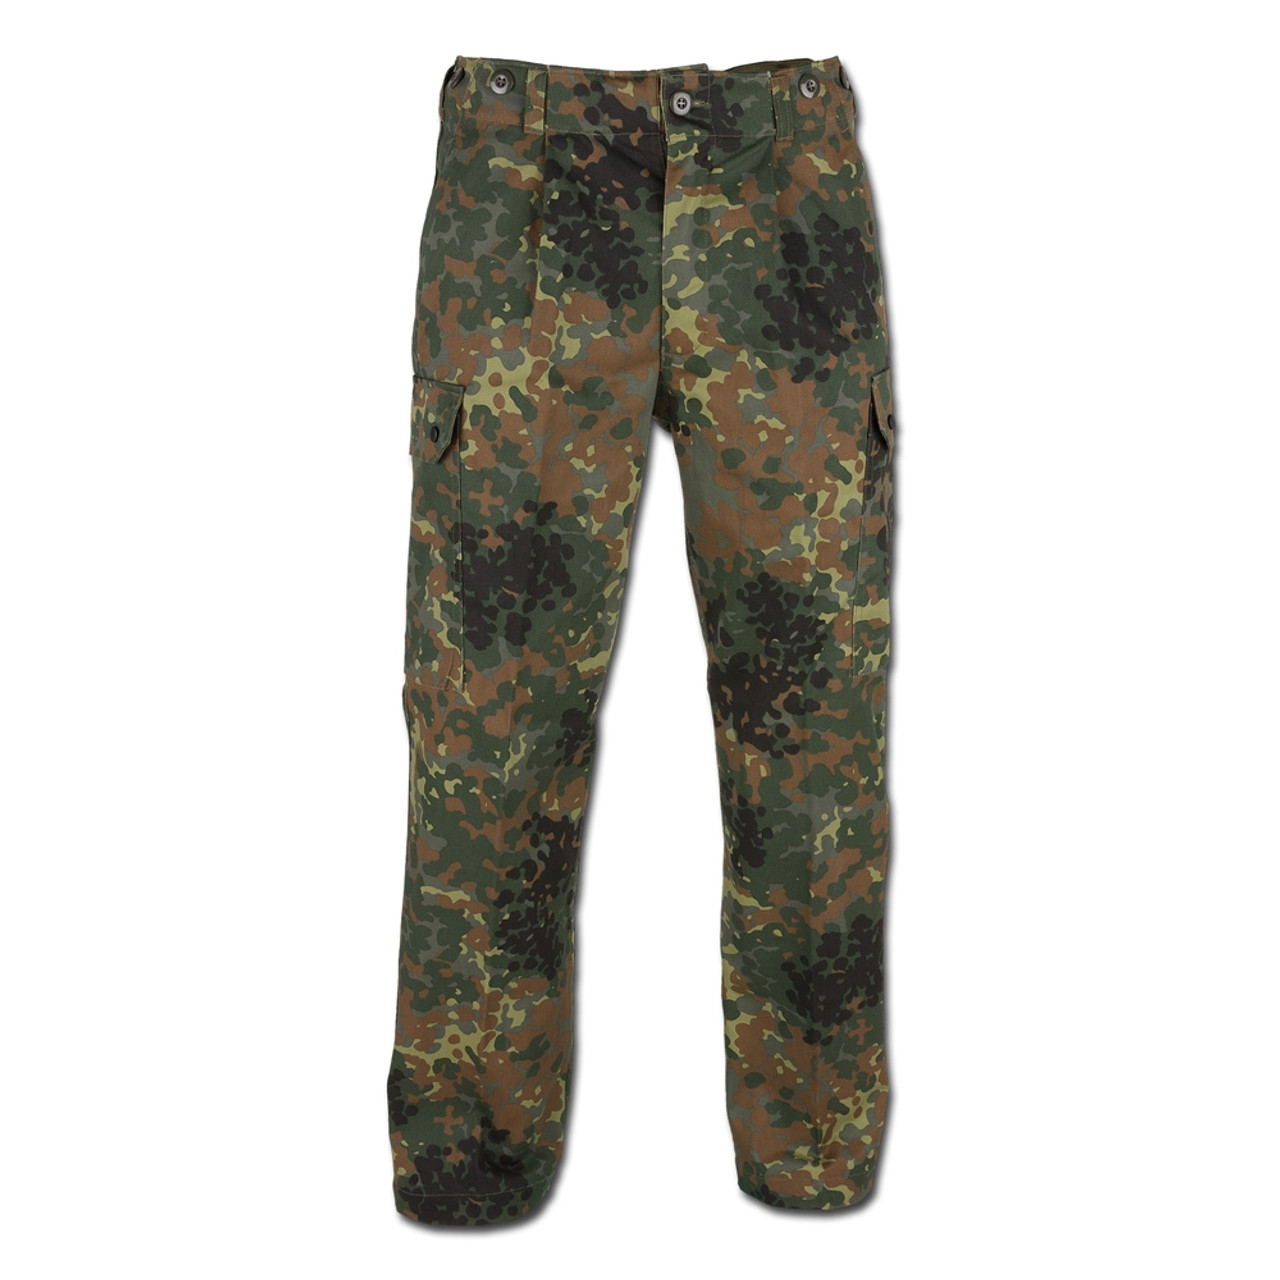 Bundeswehr Field Trousers from Hessen Antique